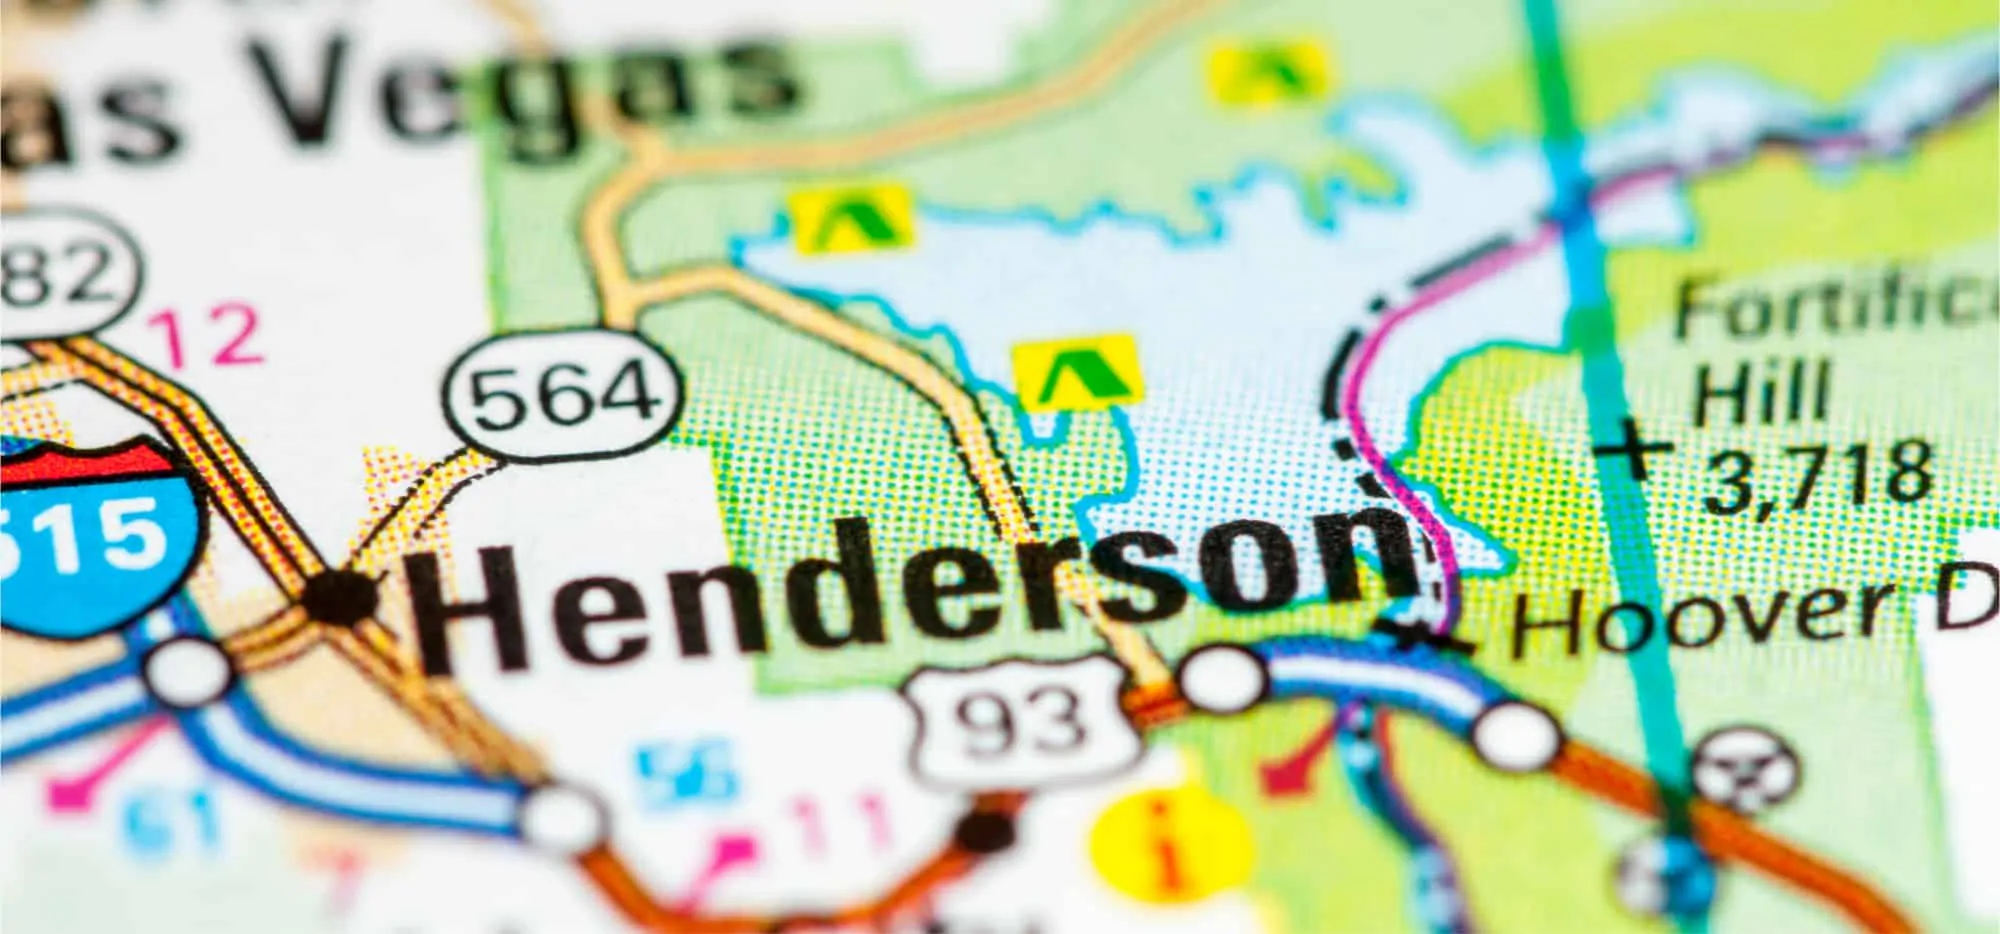 Hendseron best city to buy a home in